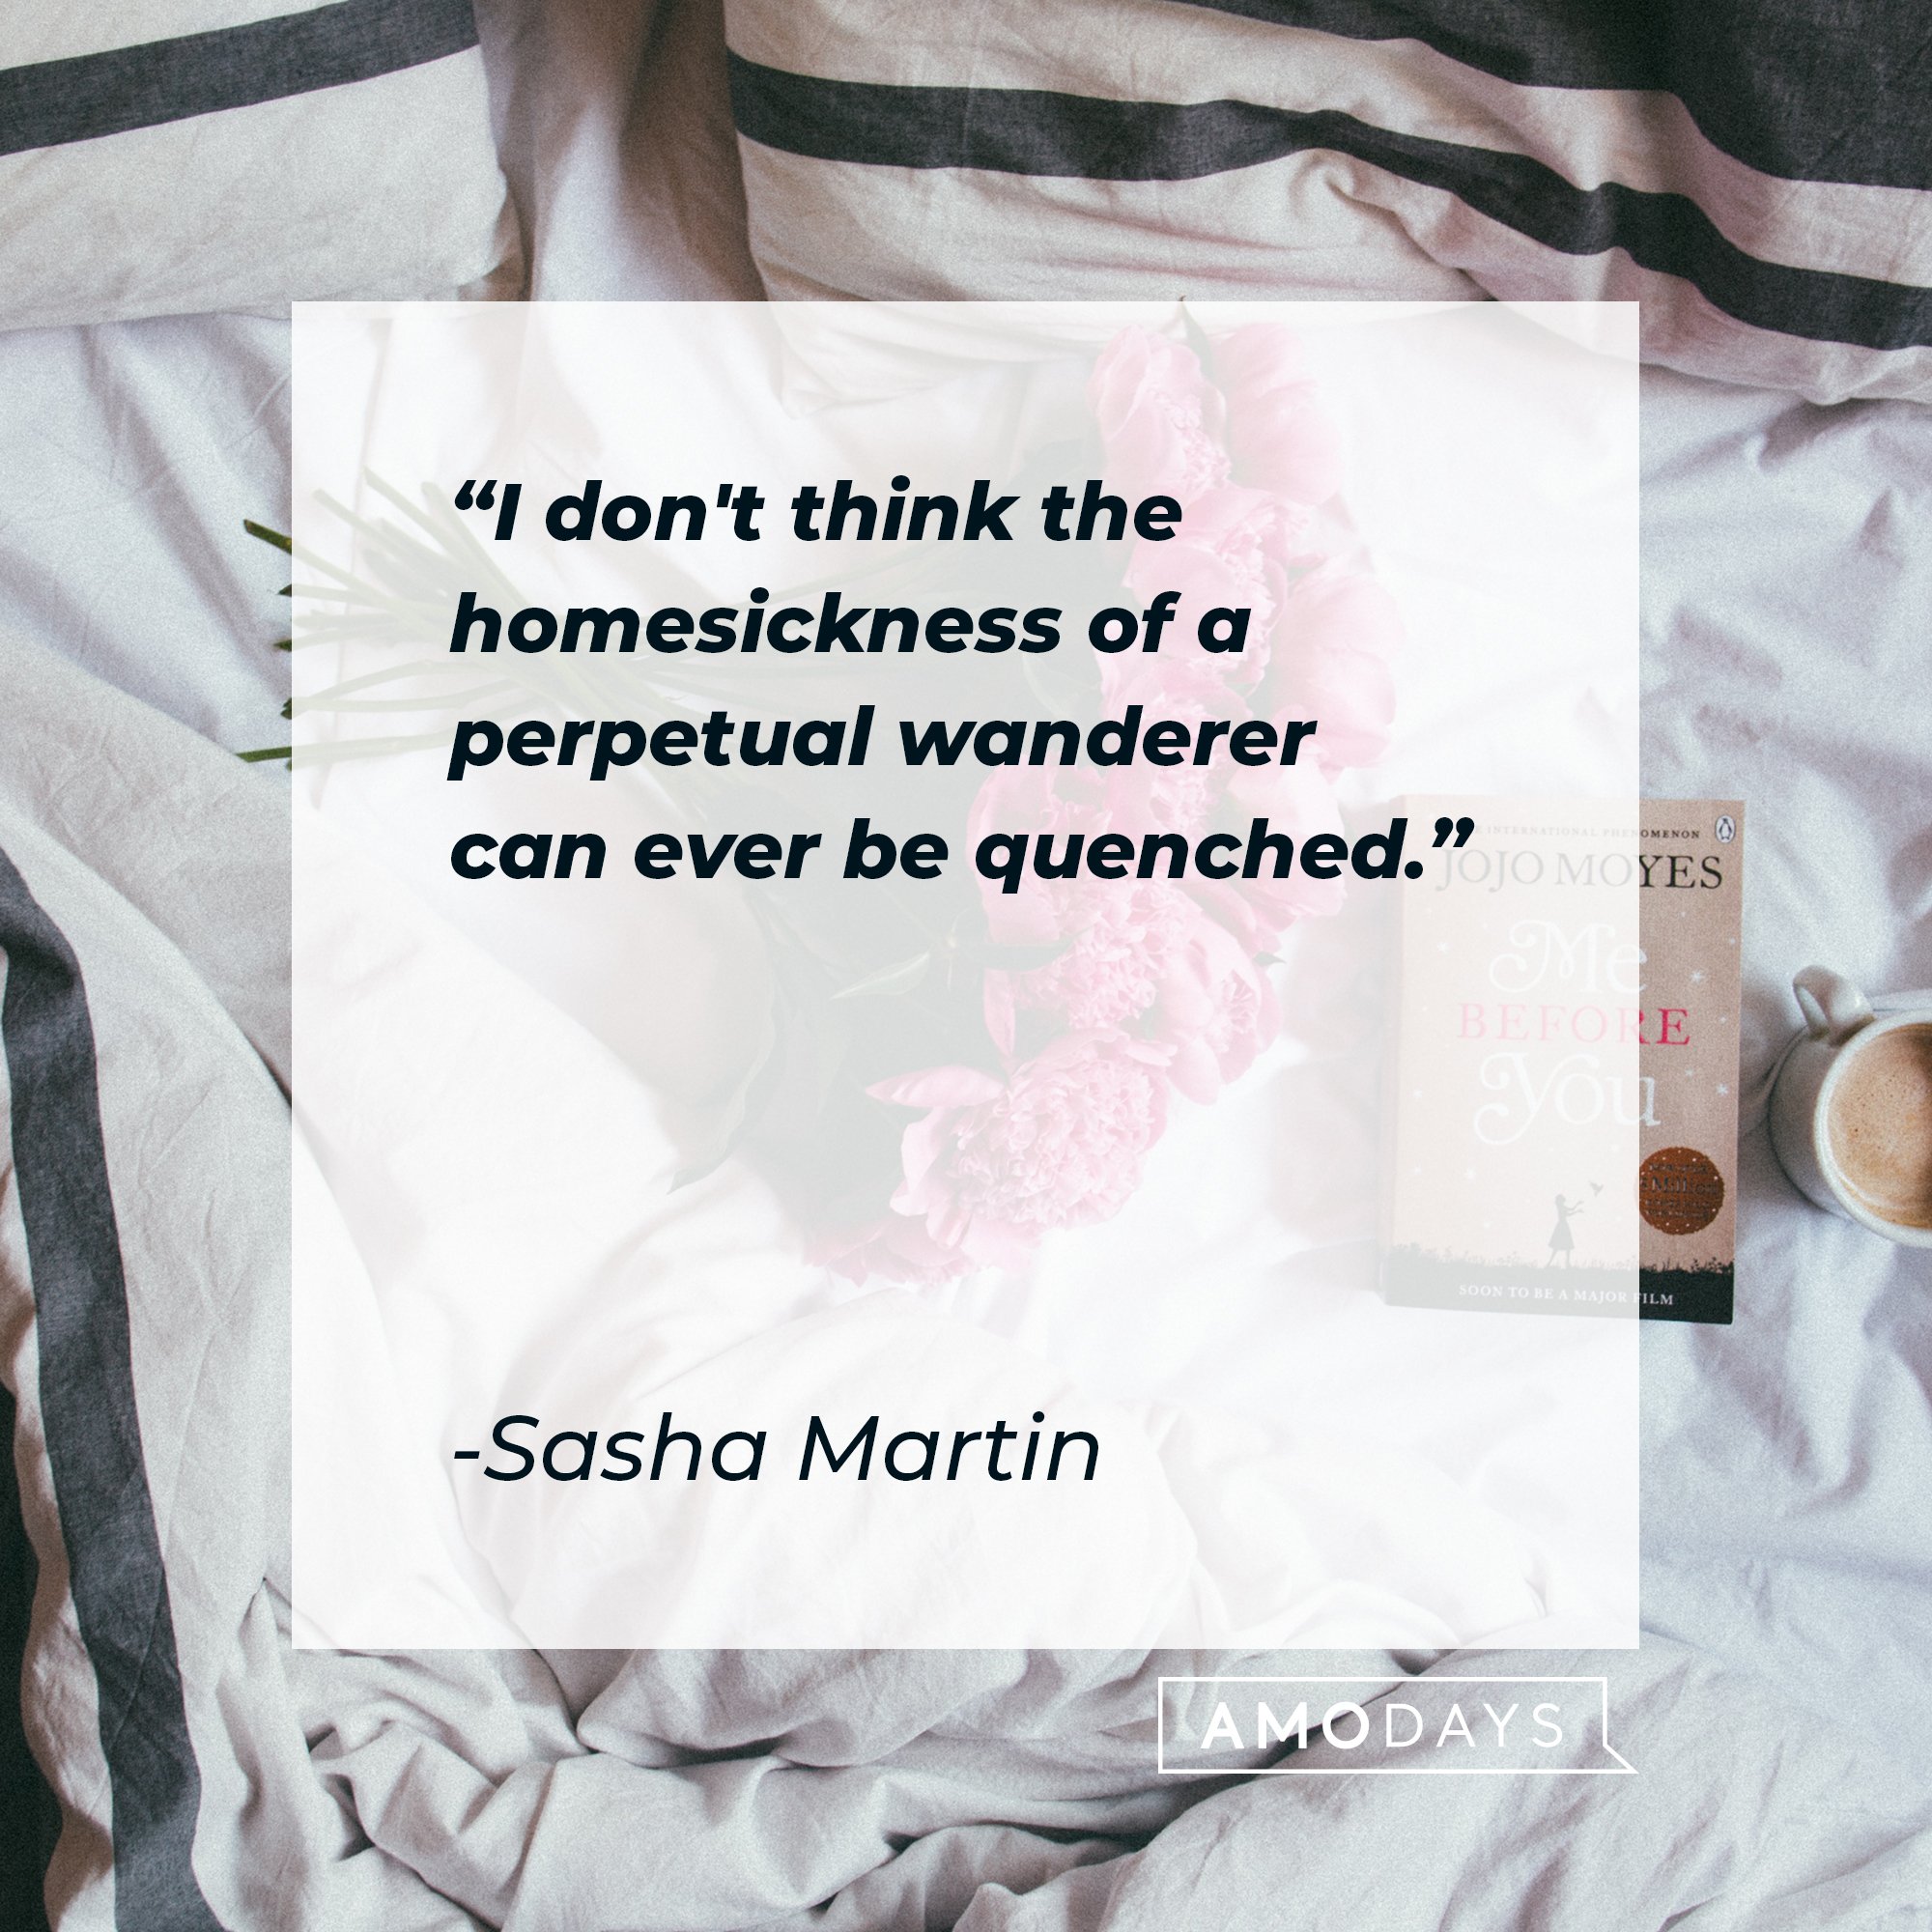 Sasha Martin's quote: "I don't think the homesickness of a perpetual wanderer can ever be quenched." | Image: AmoDays